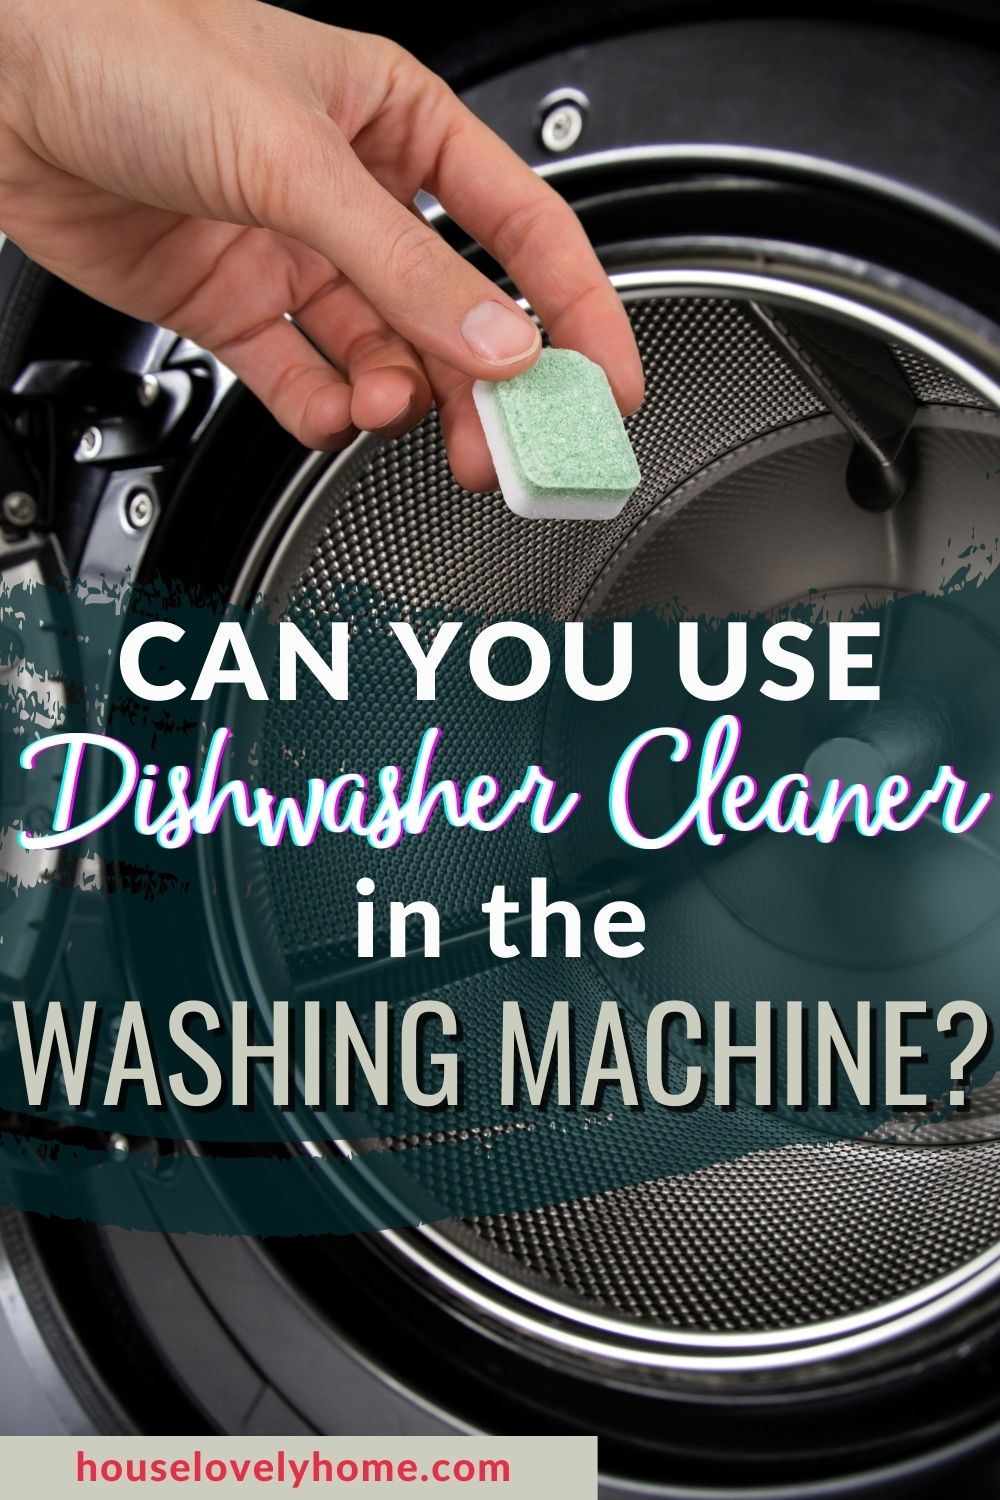 An image showing a hand holding a dishwasher cleaner pod near the opening of a washing machine with text overlay that reads Can You Use Dishwasher Cleaner in the Washing Machine